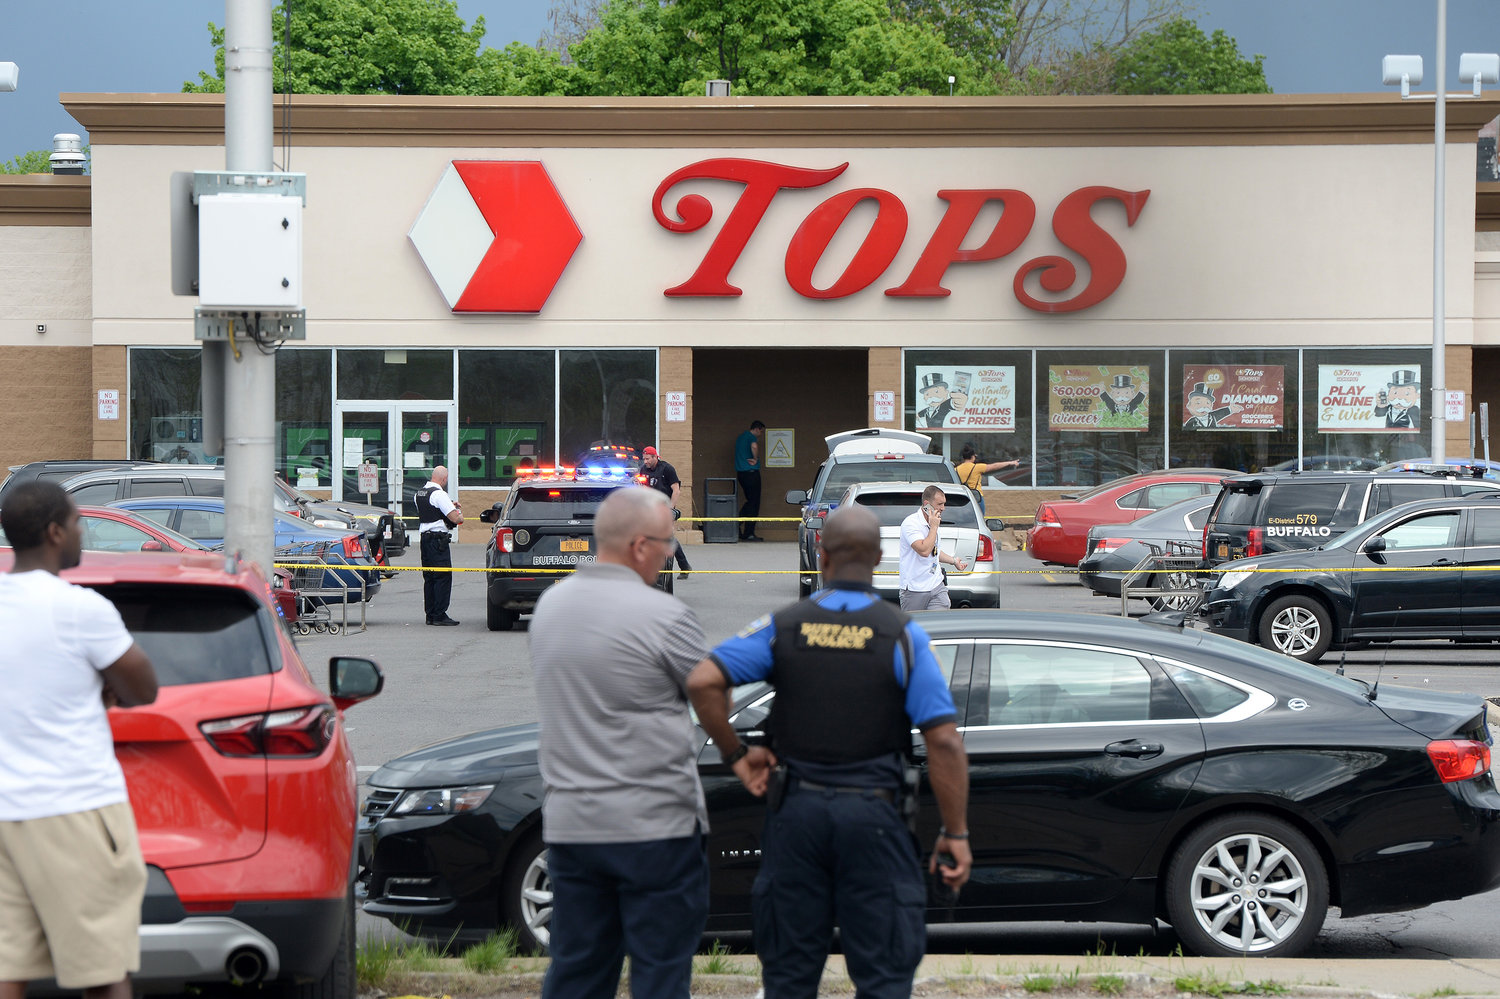 Police on scene at a Tops Friendly Market on Saturday, May 14, 2022, in Buffalo, New York. Ten people were killed after a mass shooting at the store. (John Normile/Getty Images/TNS)